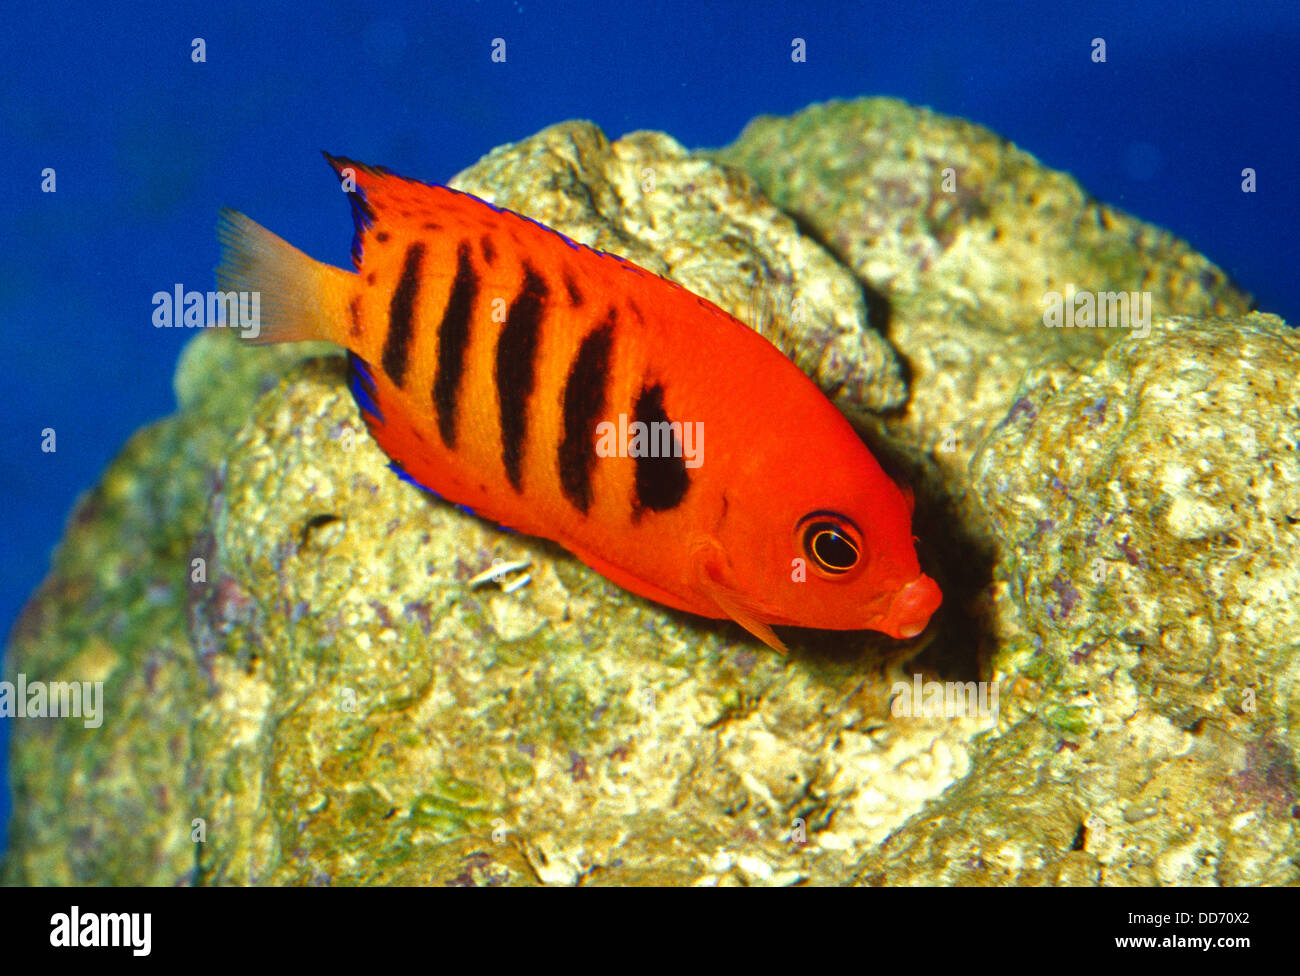 Flame Angelfish, Centropyge loriculus, Pamacanthidae, Indo-pacific Ocean Stock Photo